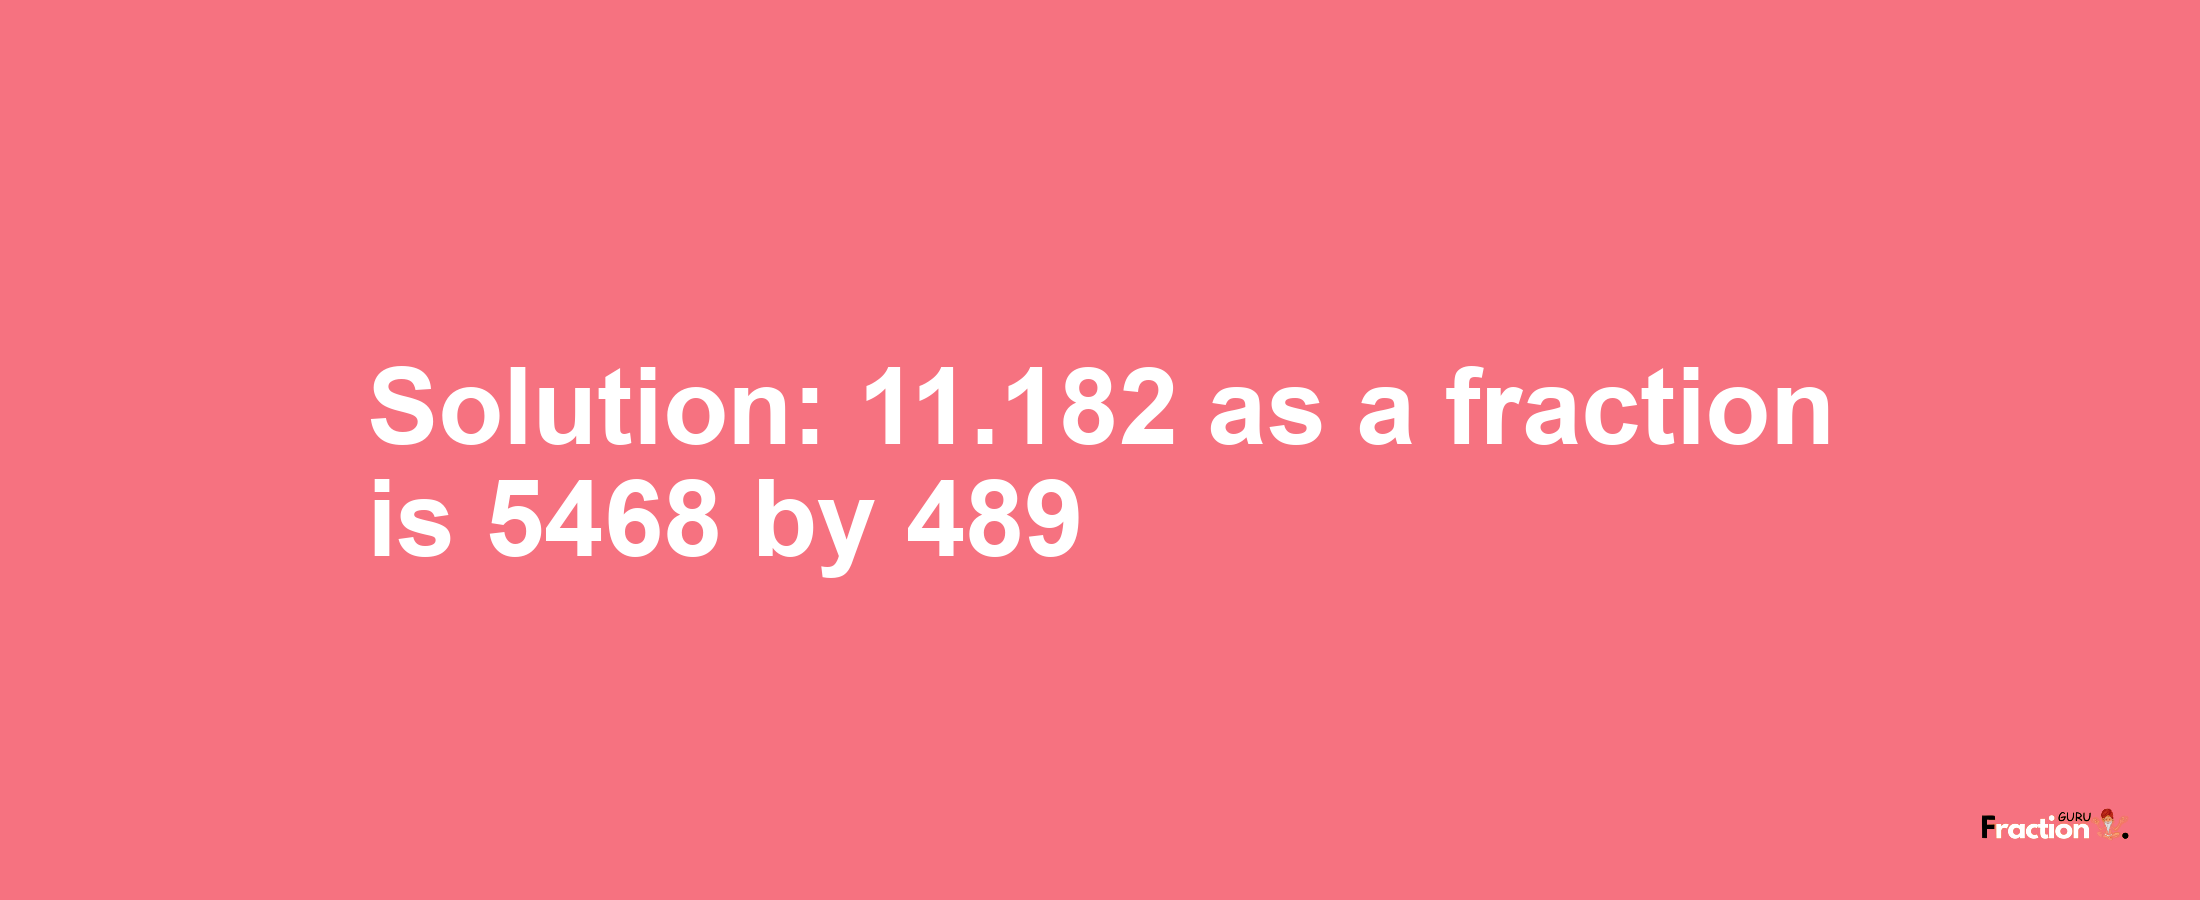 Solution:11.182 as a fraction is 5468/489